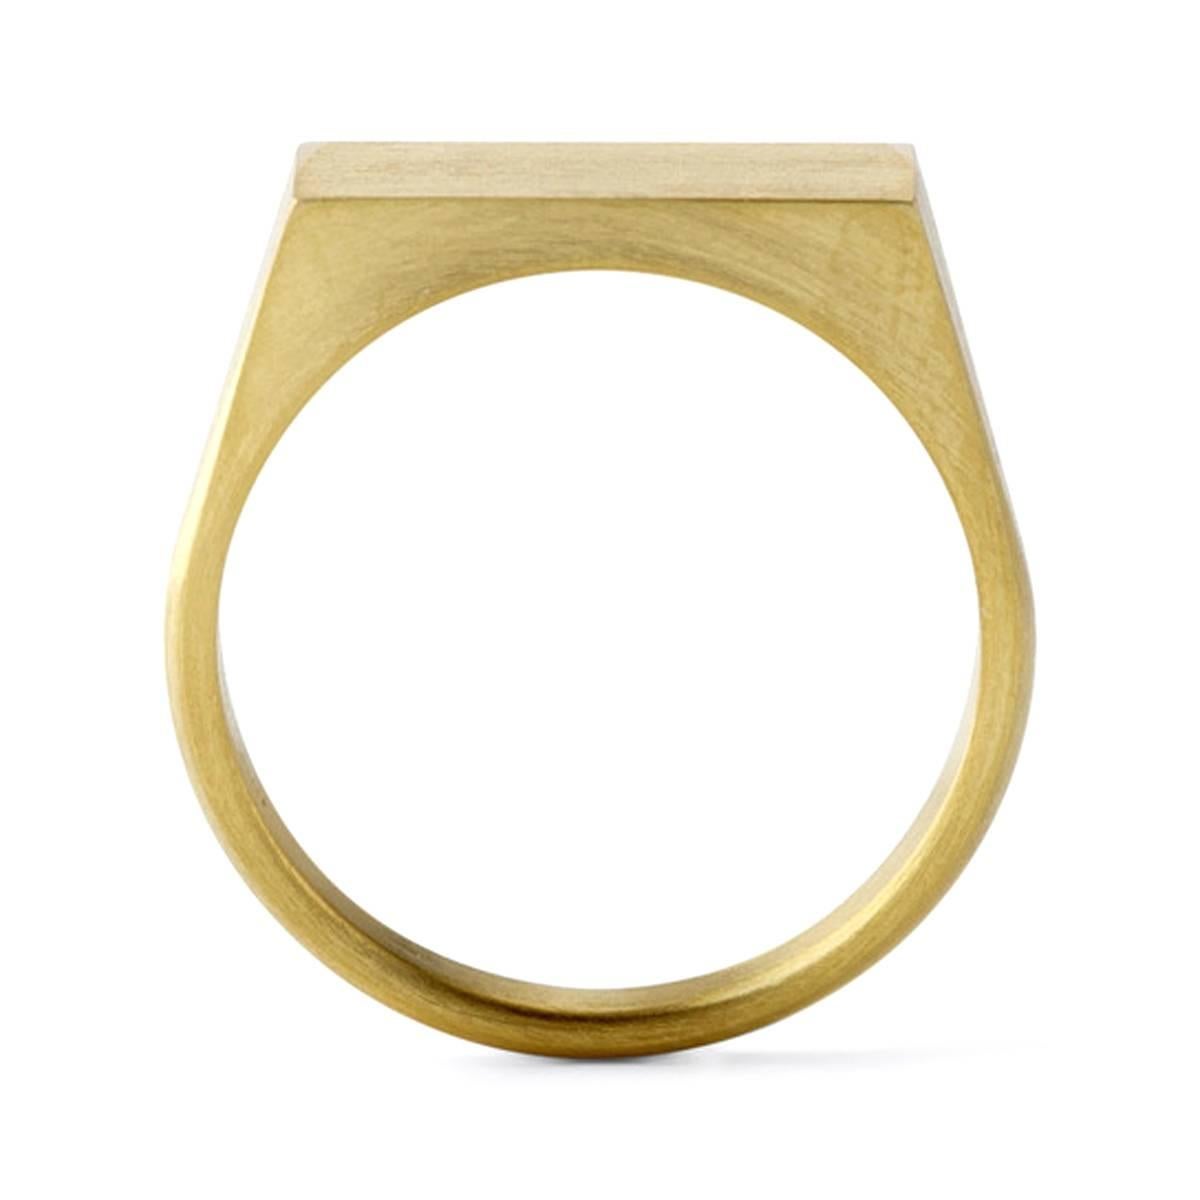 A classic rectangular signet ring made of 18 karat yellow gold. The signet surface and inside the ring band is polished in contrast with the surface of the ring band which is matte. 

Japan Size #13～#20
Signet top measurements: 14mm x 7.5mm
This